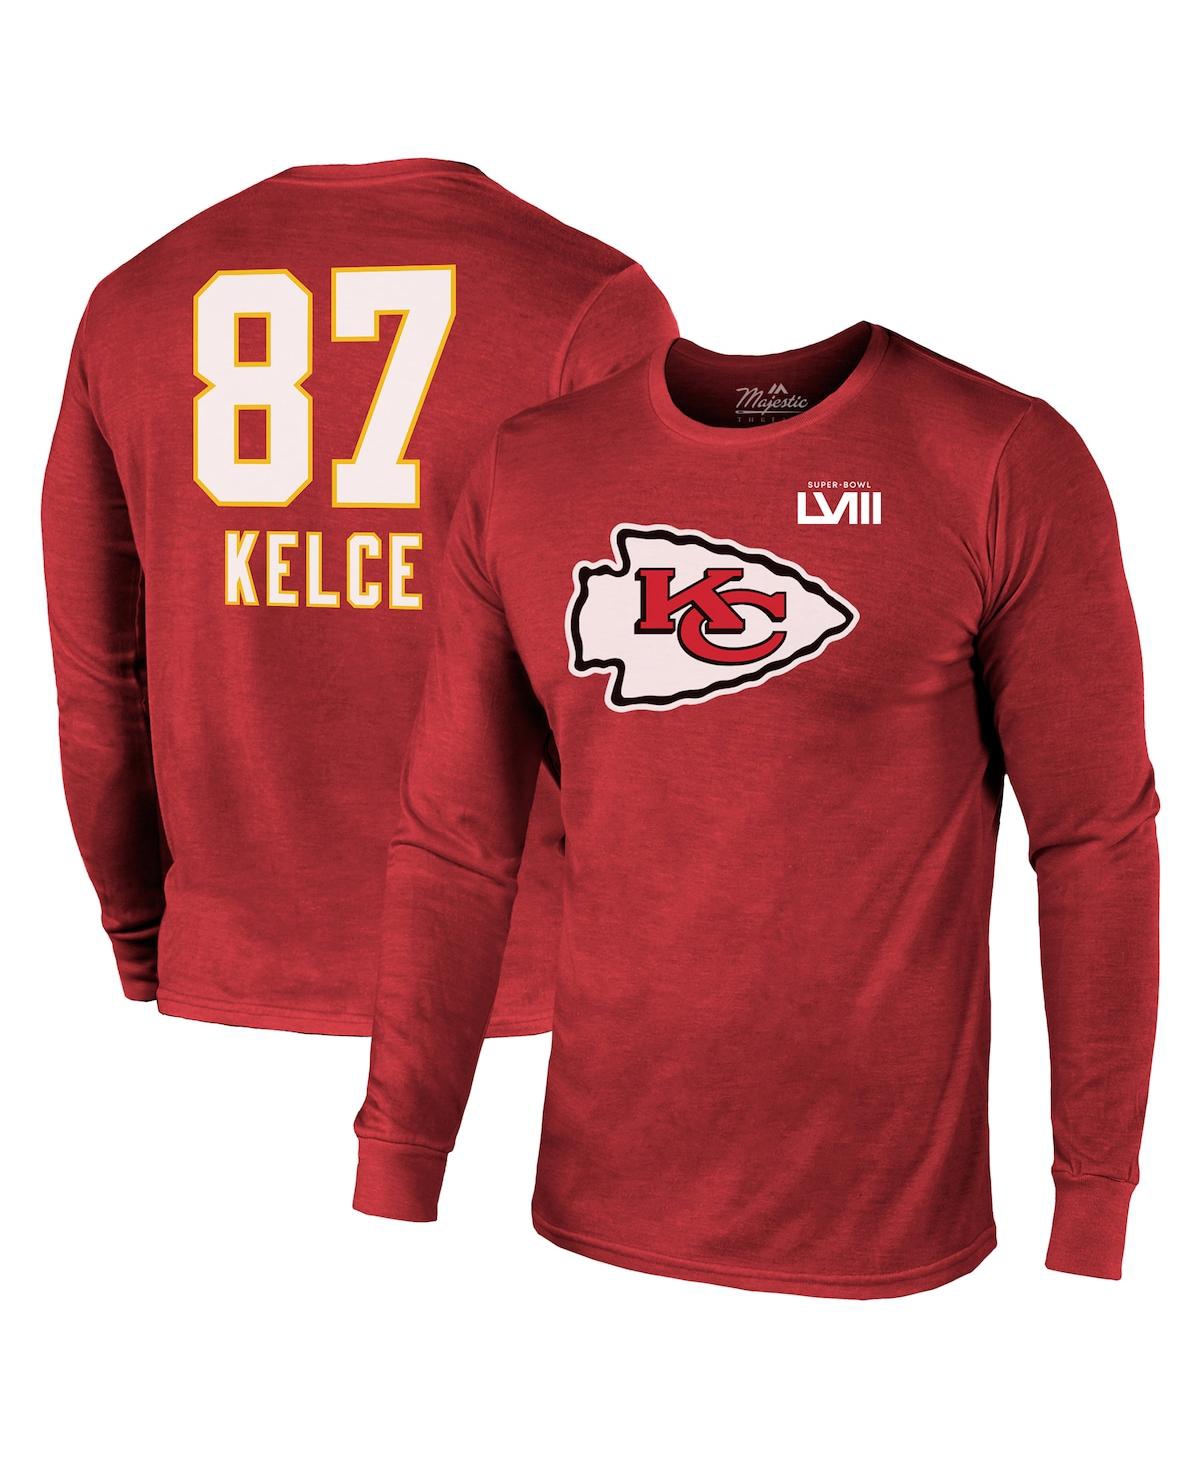 Shop Majestic Men's  Threads Travis Kelce Red Kansas City Chiefs Super Bowl Lviii Name And Number Tri-blen